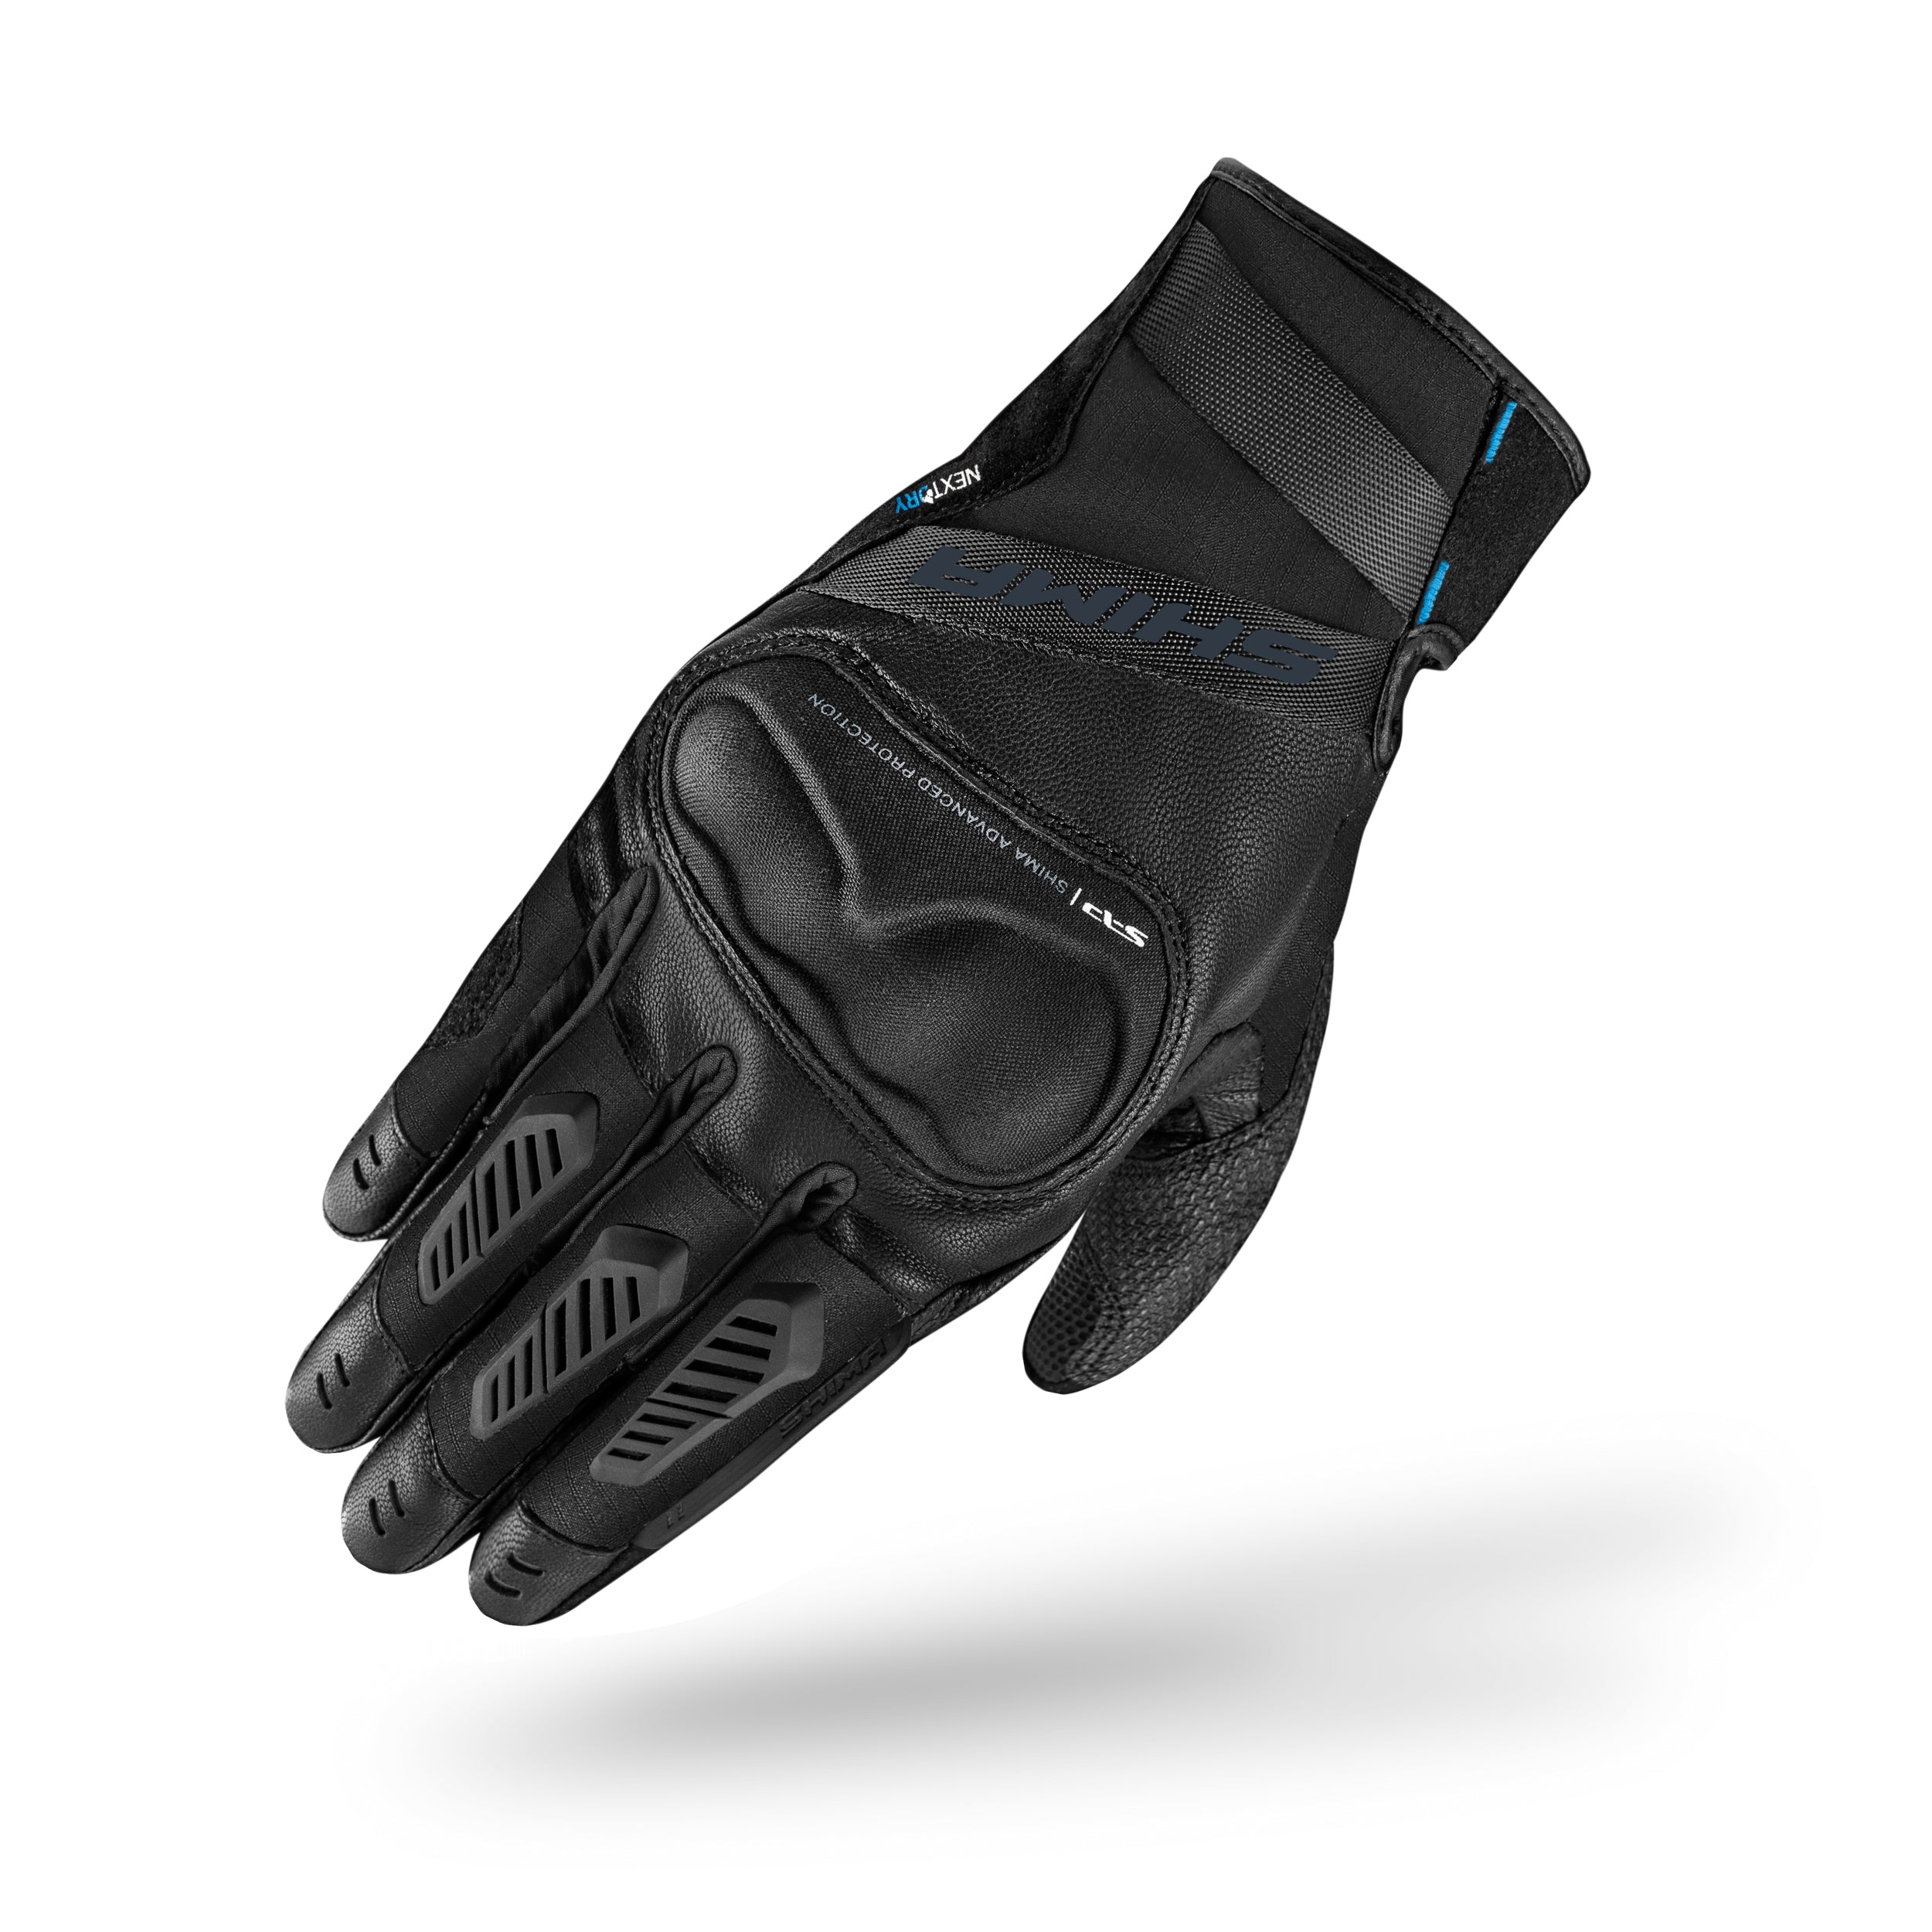 black short women's motorcycle gloves from Shima